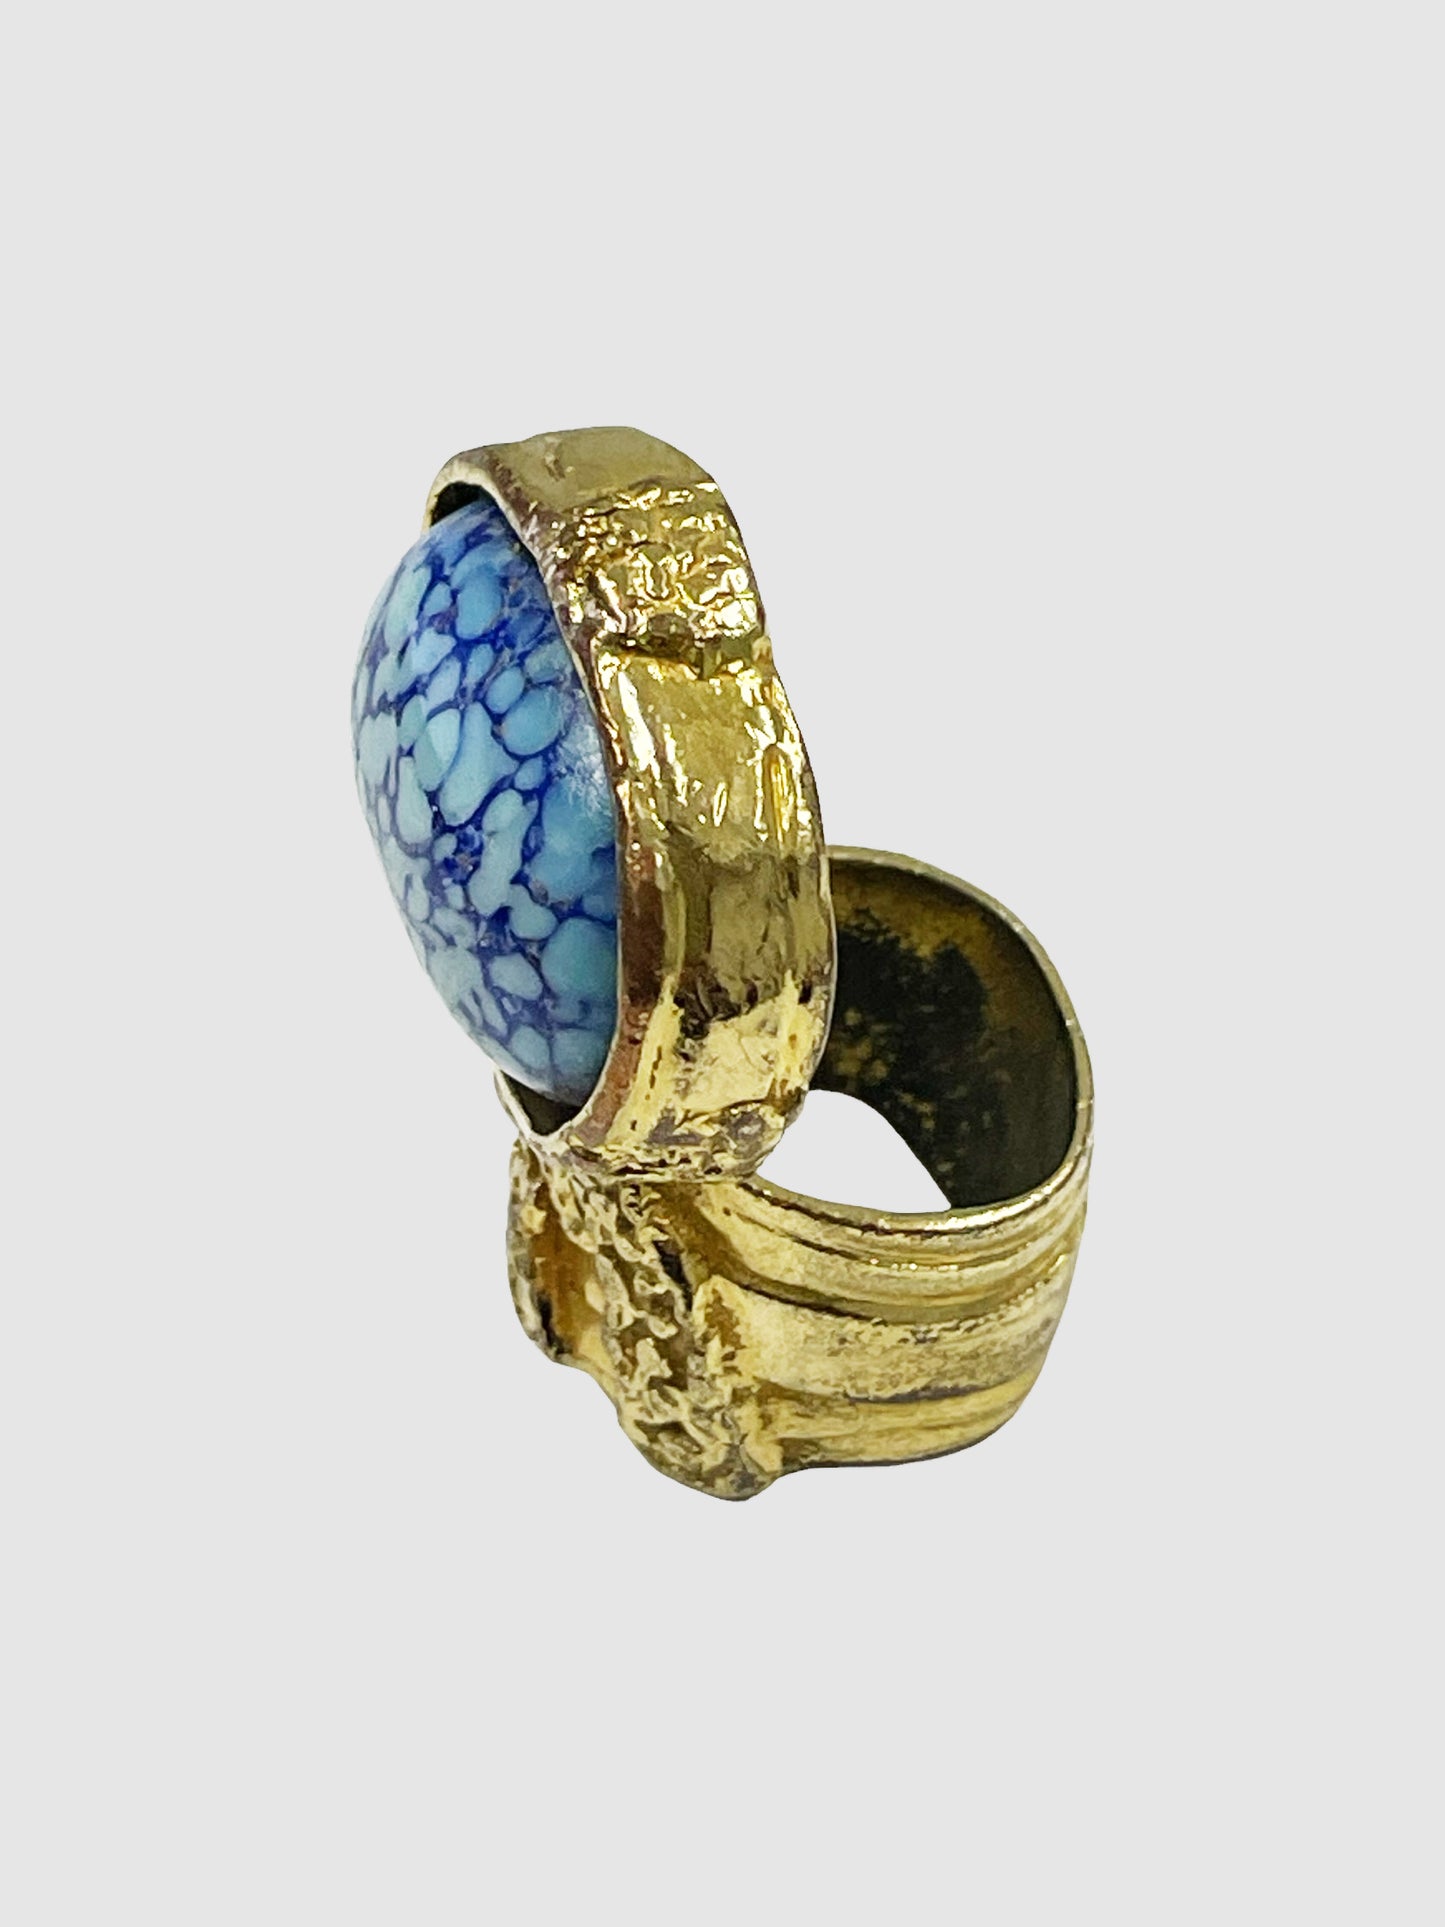 Yves Saint Laurent Arty Cocktail Ring - Size 6